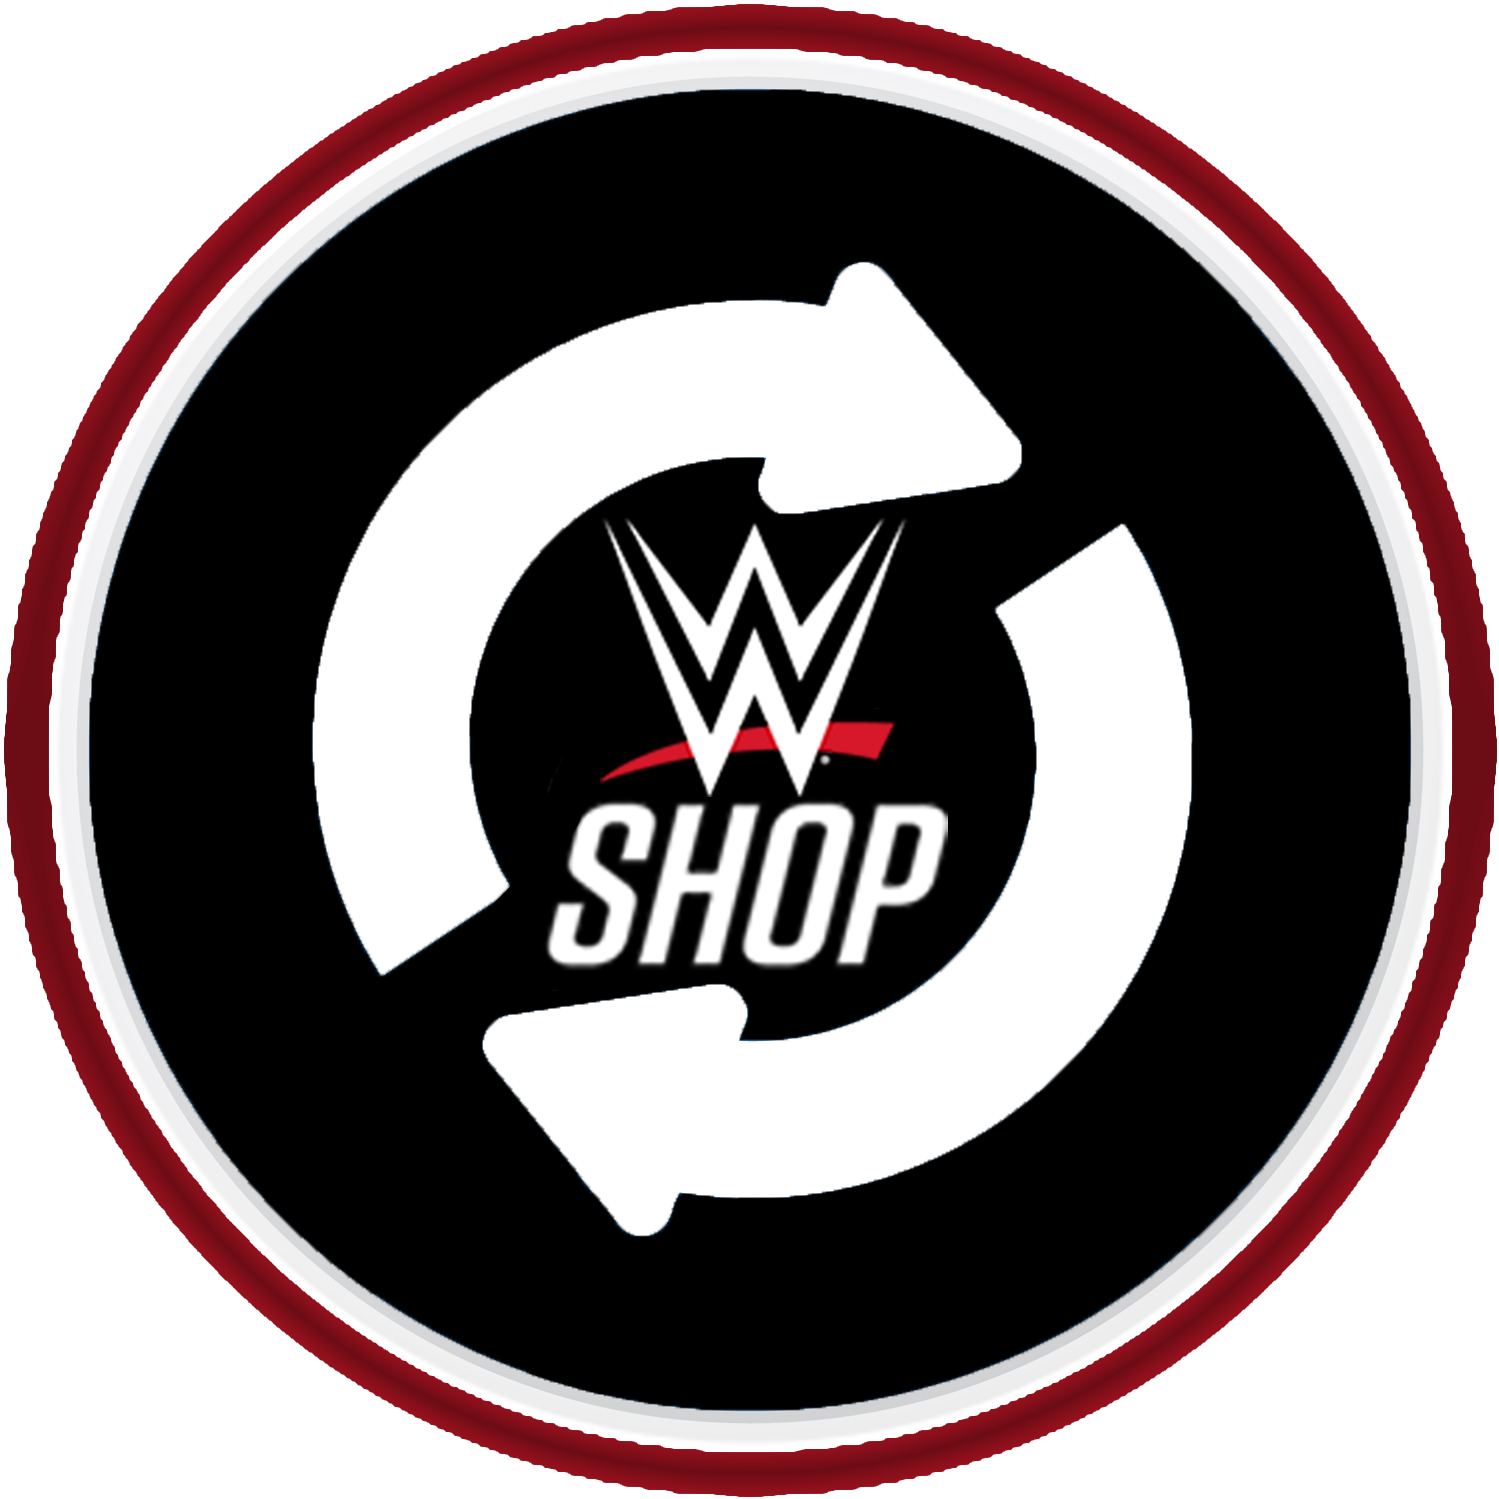 Follow us for WWEShop related posts! Code 